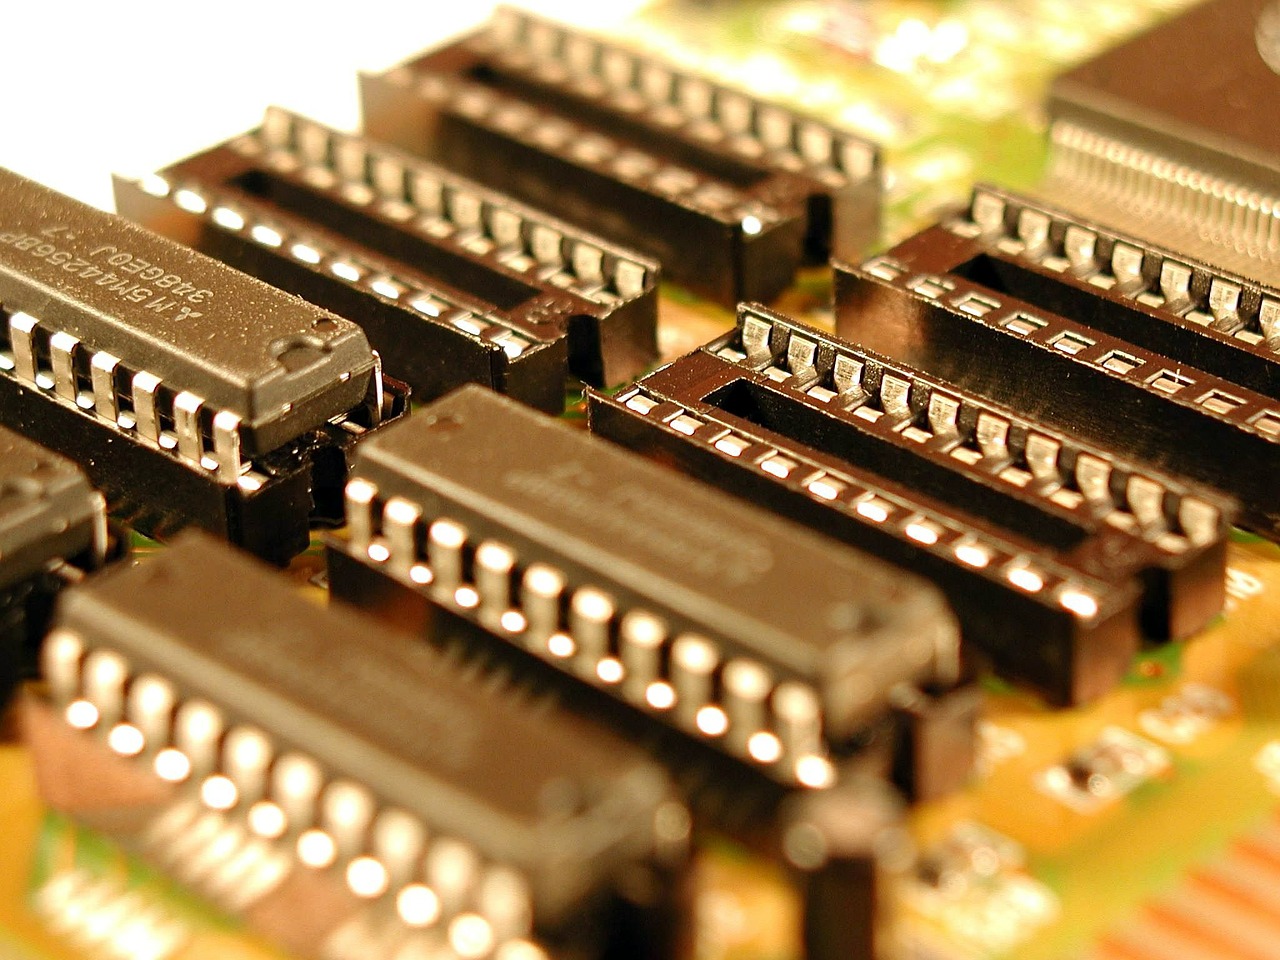 integrated circuit chips